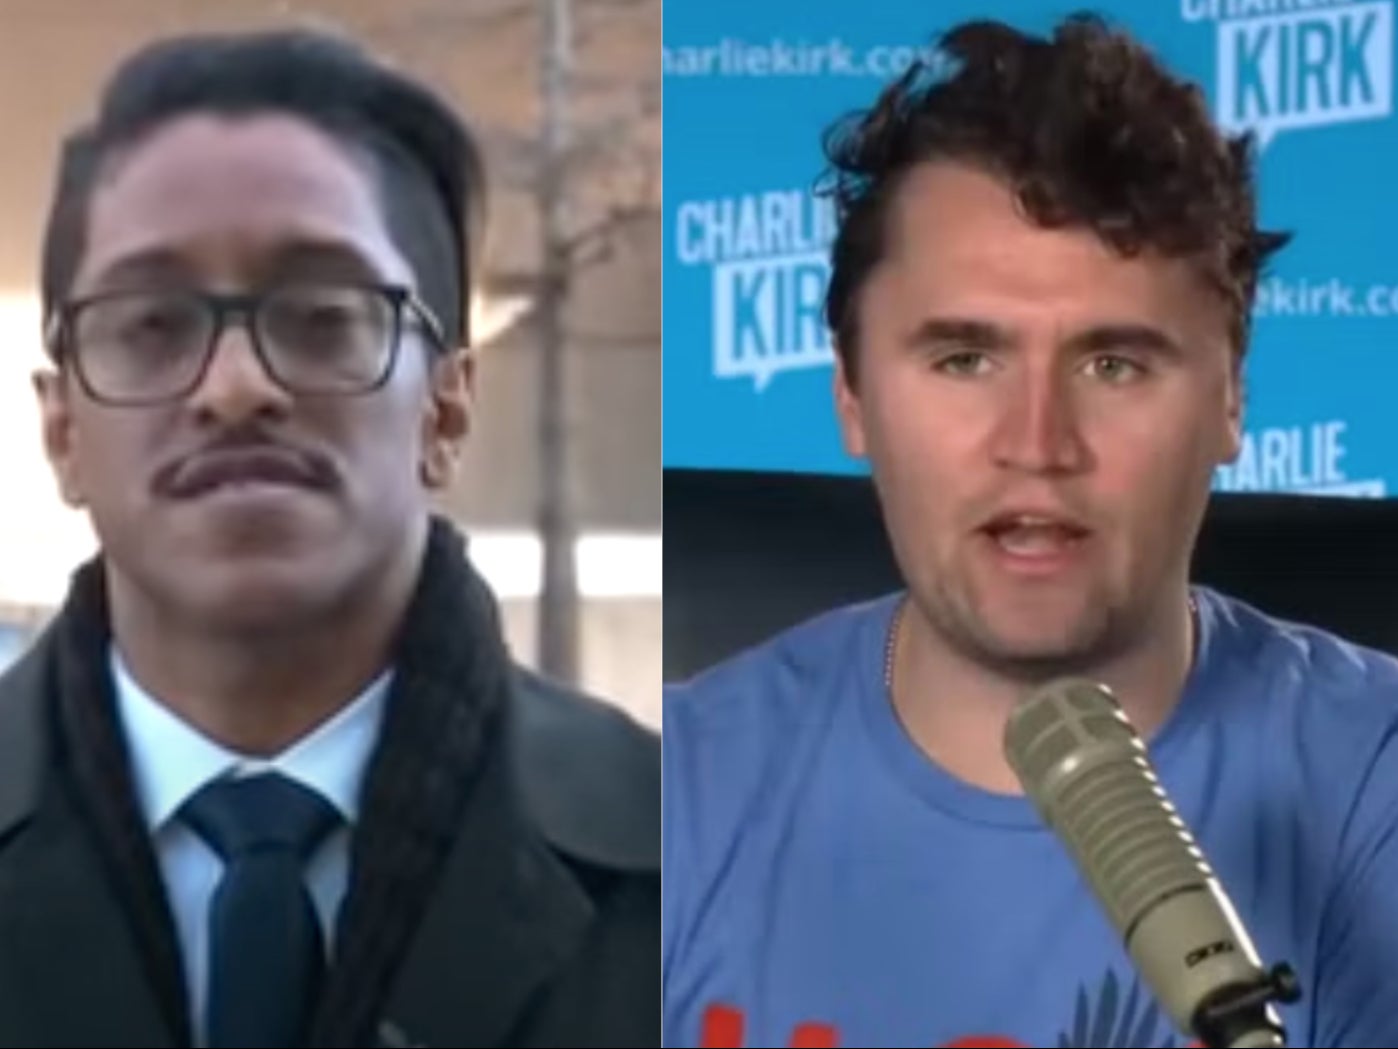 <p>Left, Ali Alexander, the organiser of the “Stop the Steal” rally; right, Charlie Kirk, founder of Turning Point USA</p>